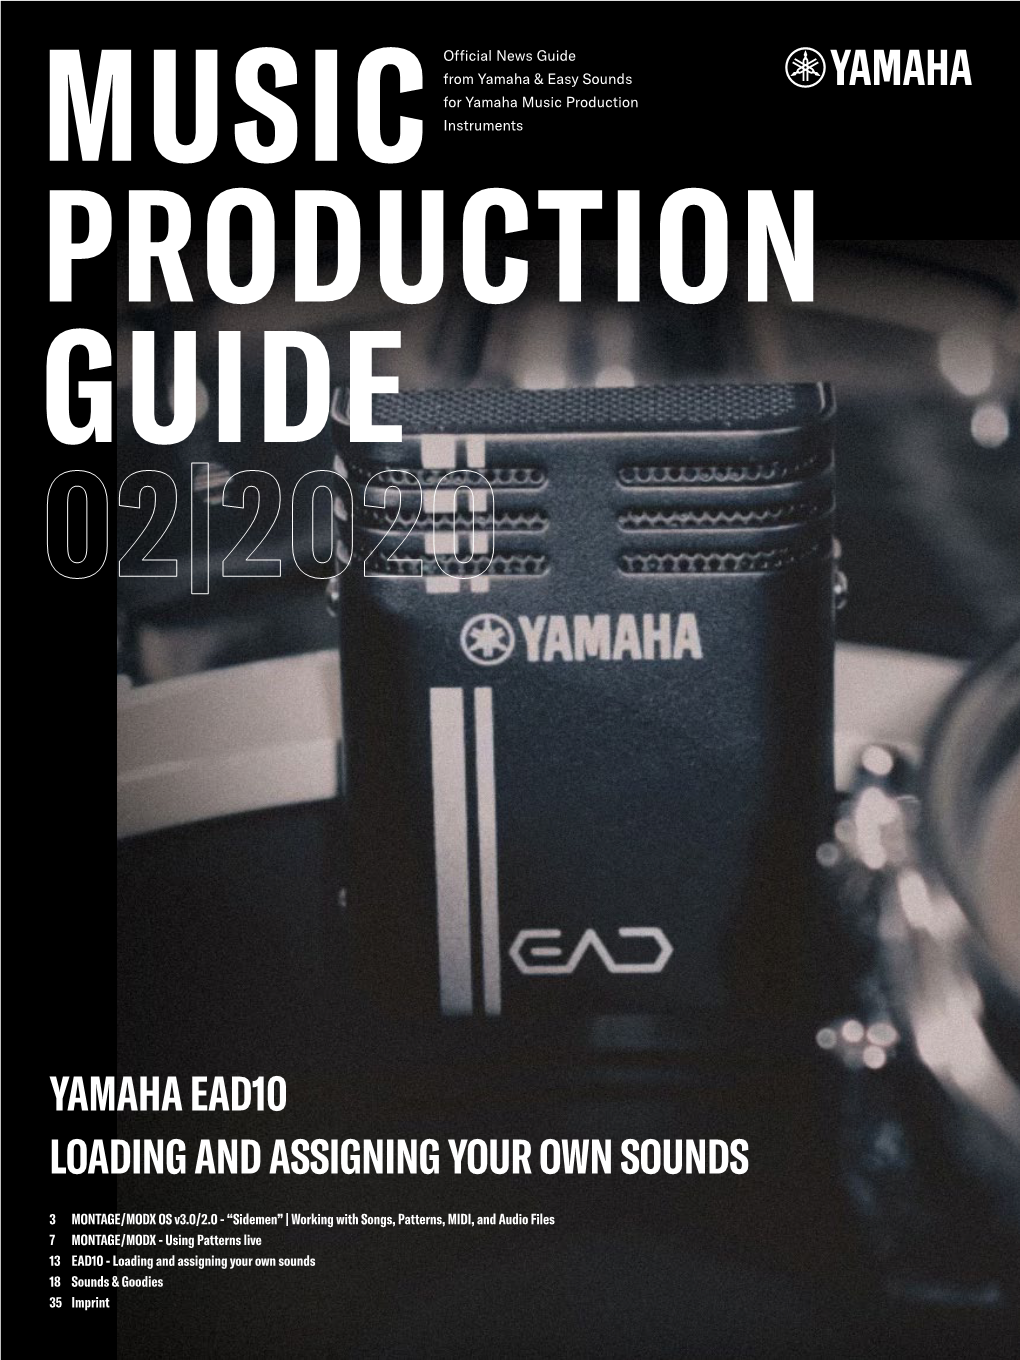 Official News Guide from Yamaha & Easy Sounds for Yamaha Music Production MUSIC Instruments PRODUCTION GUIDE 02|2020